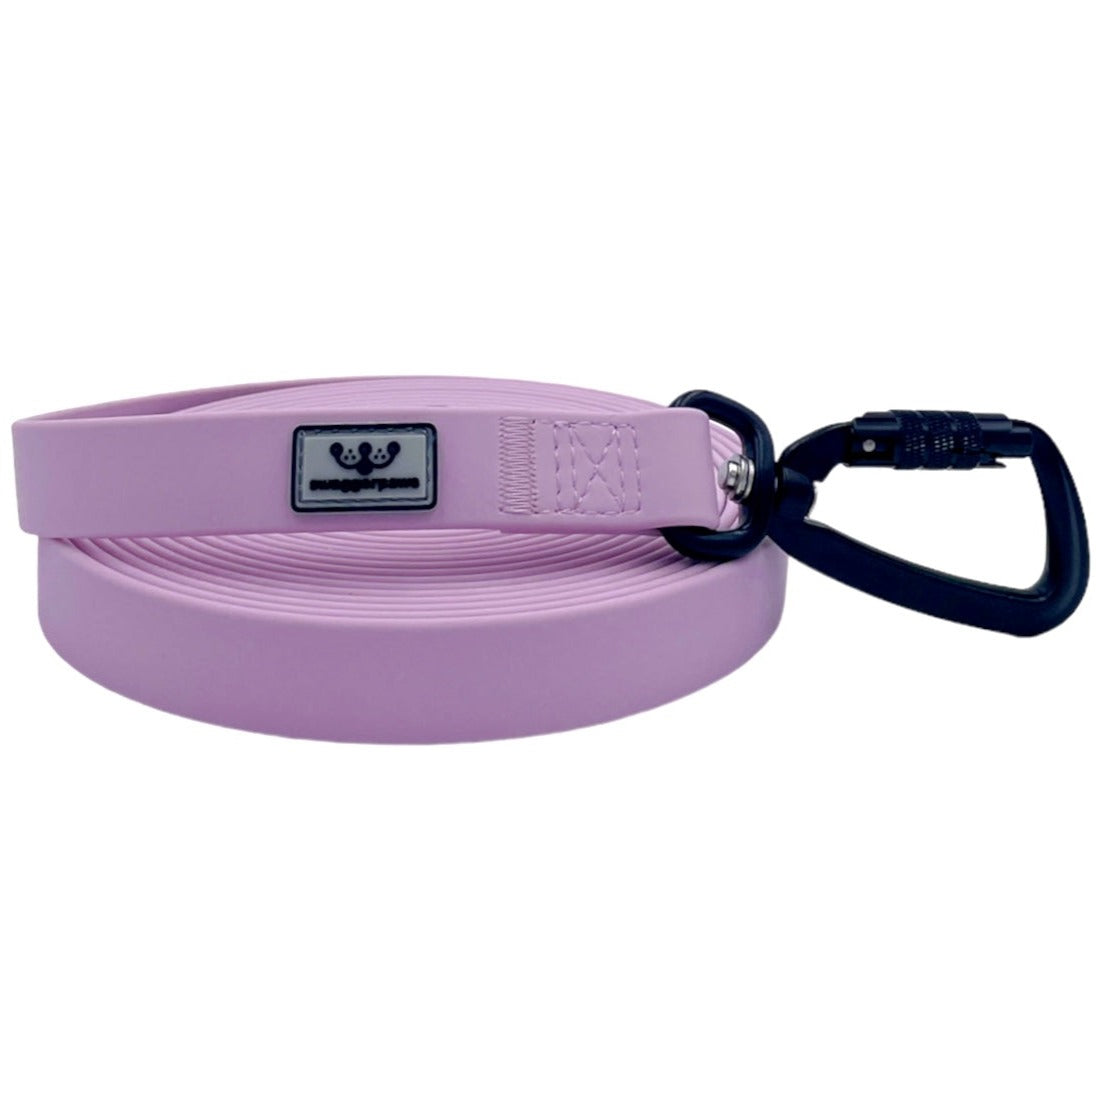 SwaggerPaws waterproof long line dog lead with auto-lock carabiner, lavender purple